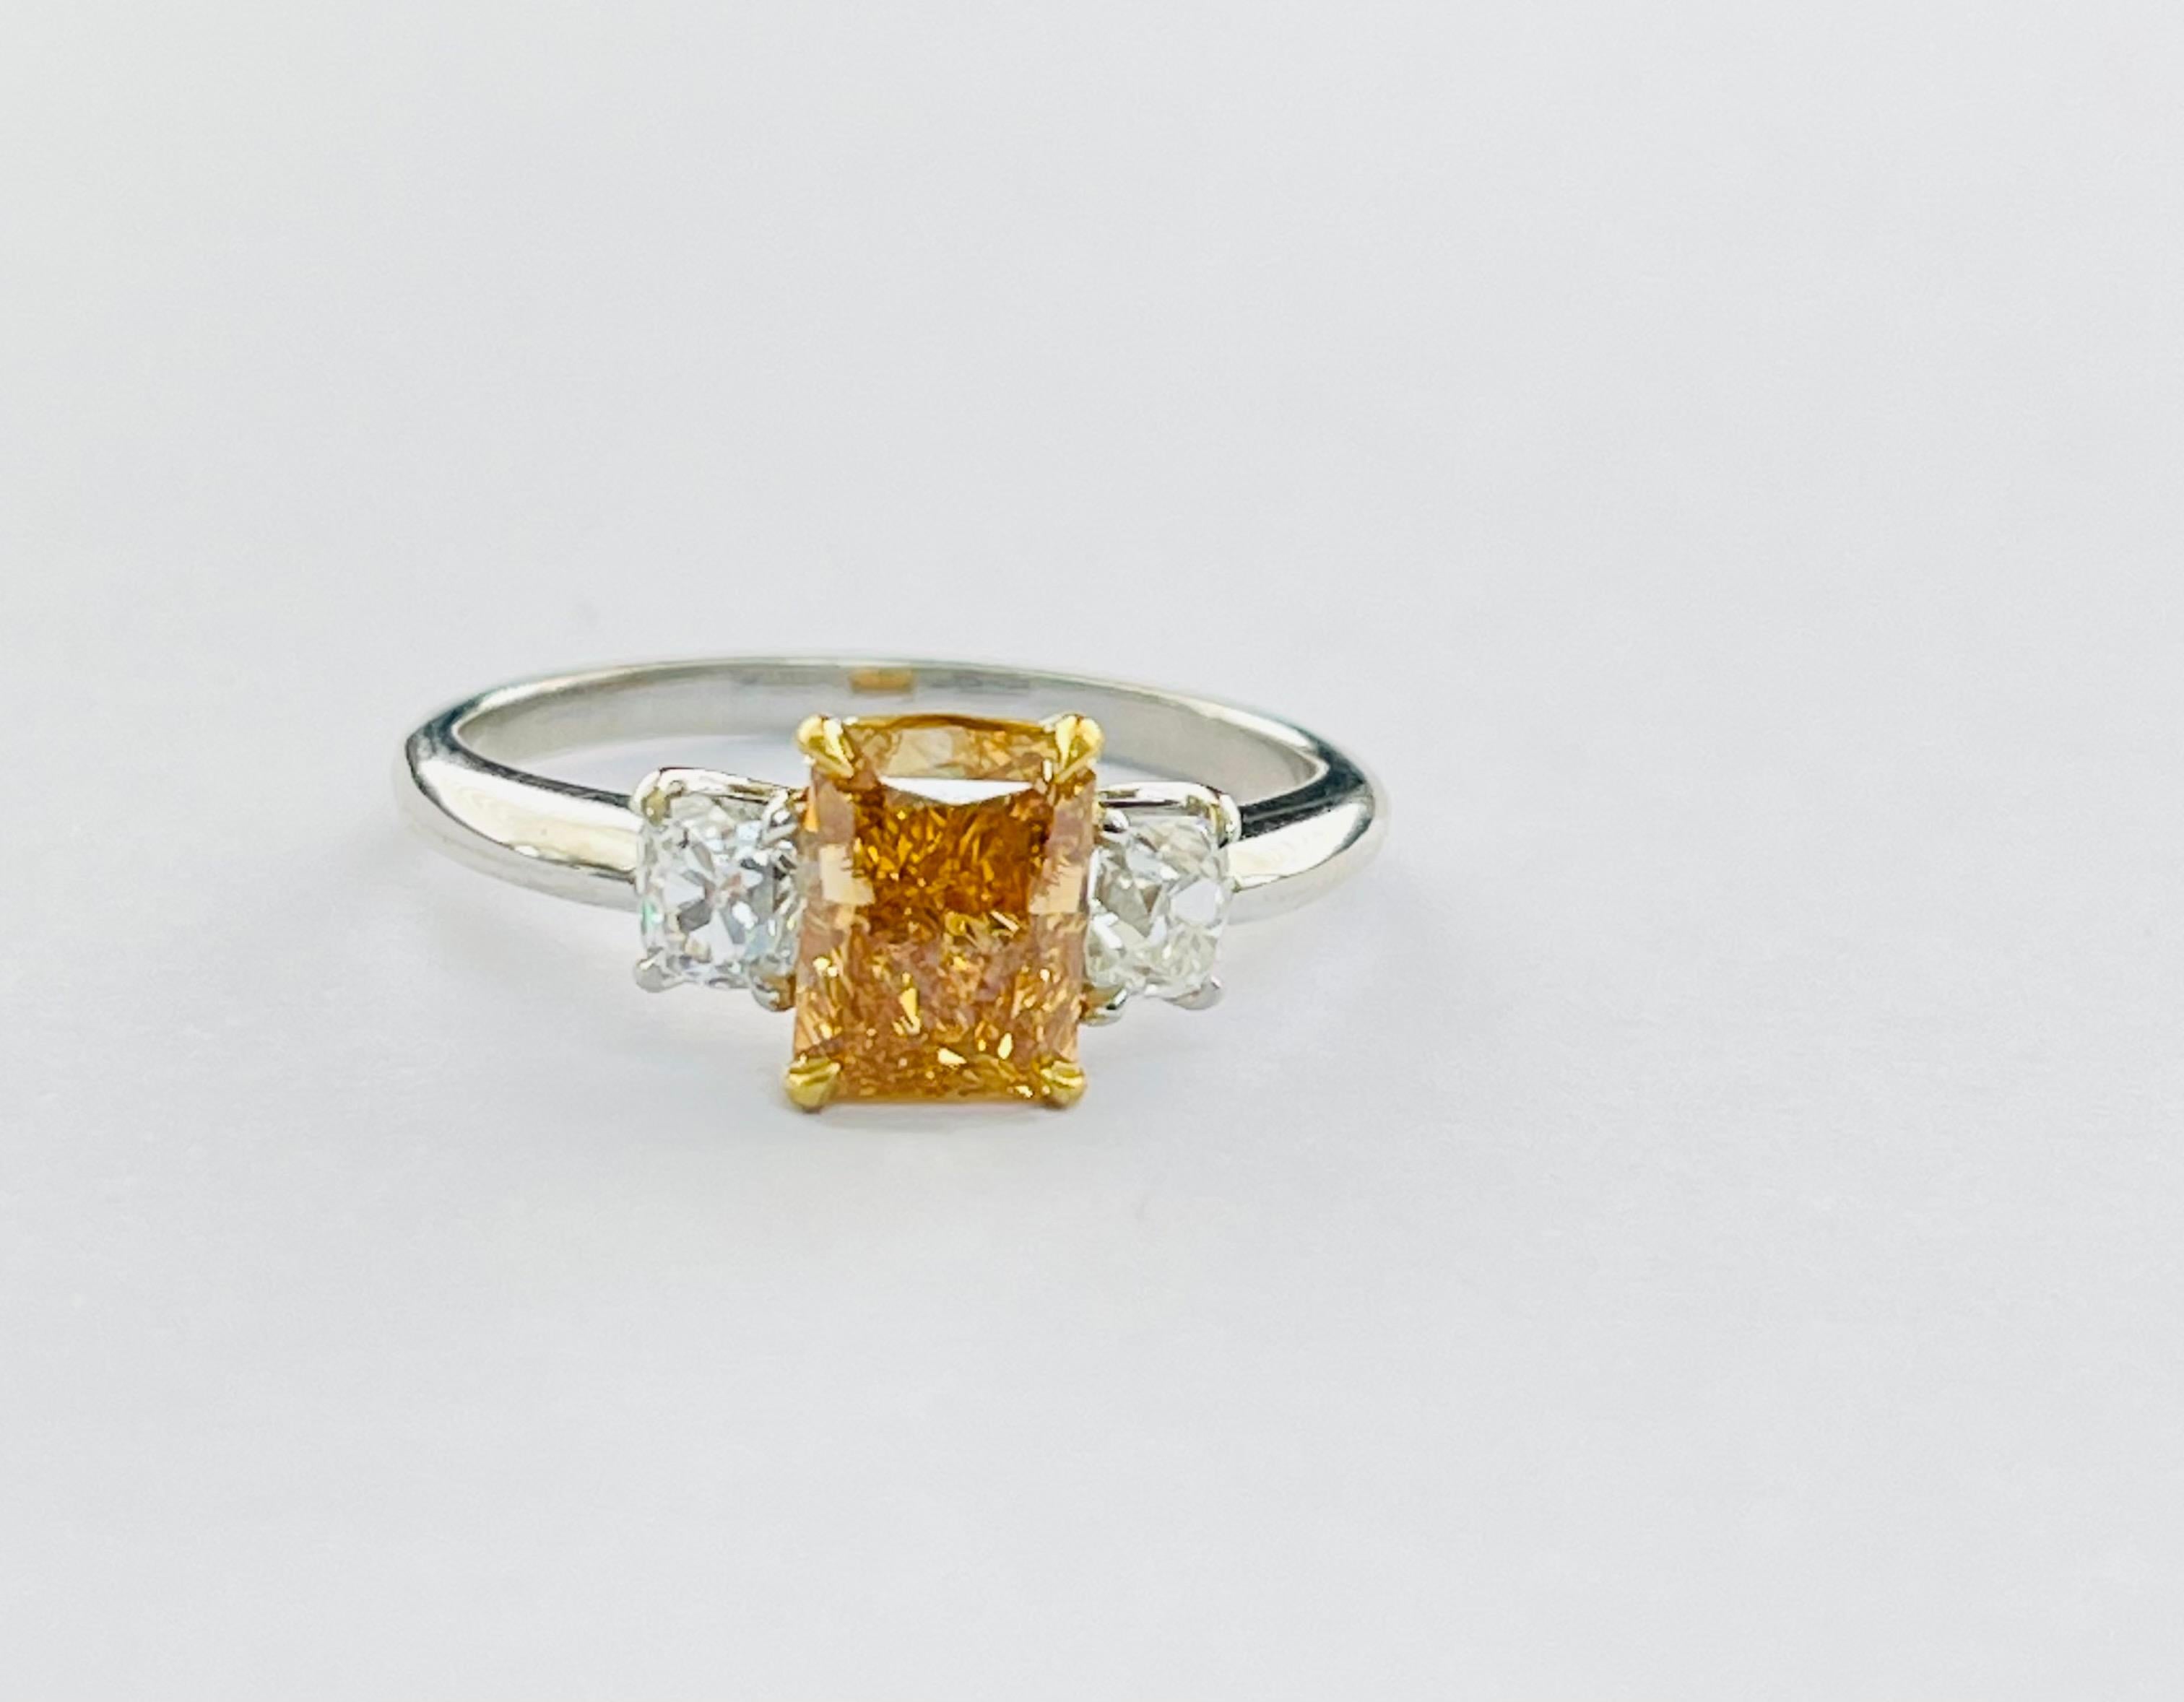 Emerald Cut Fancy Intense Yellowish Orange Engagement Ring In 22K Yellow Gold And Platinum.  For Sale